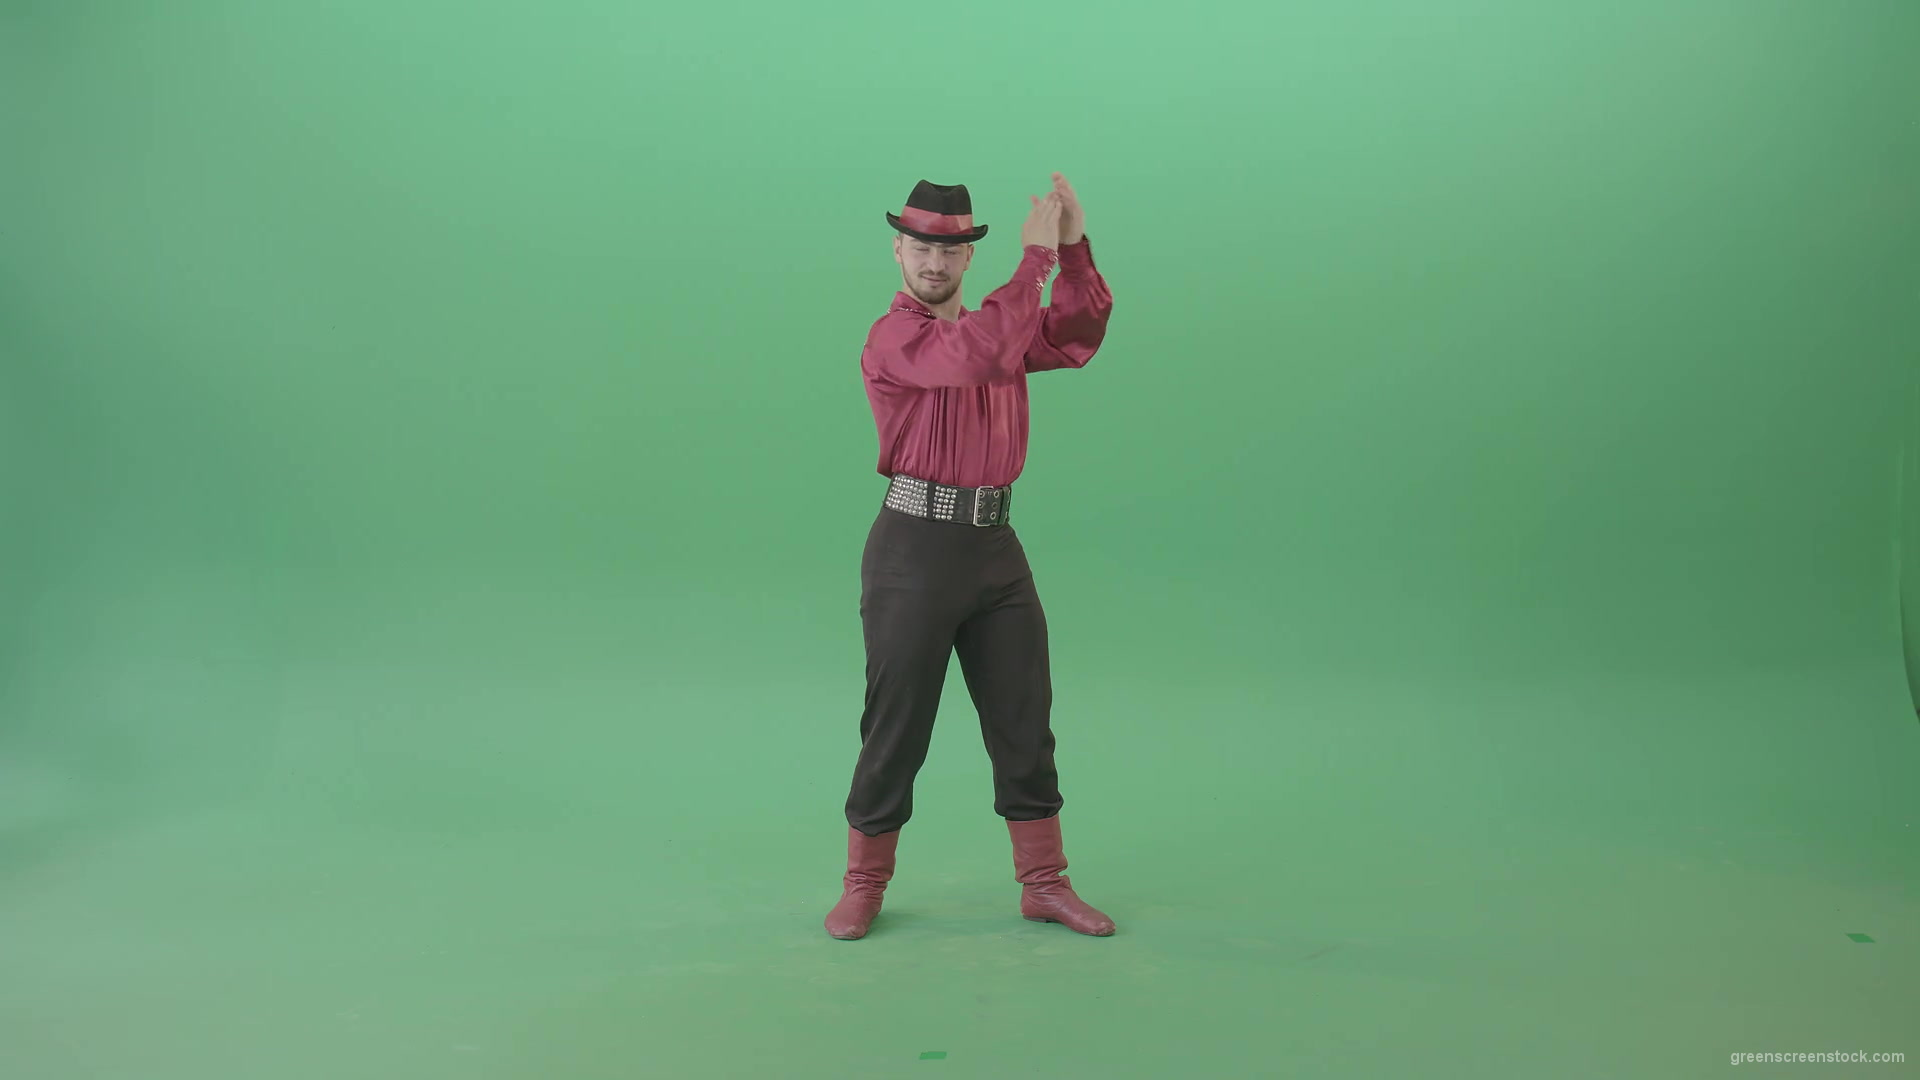 Modovian-Balkan-Gipsy-man-clapping-hands-isolalated-on-green-screen-4K-Video-Footage-1920_008 Green Screen Stock